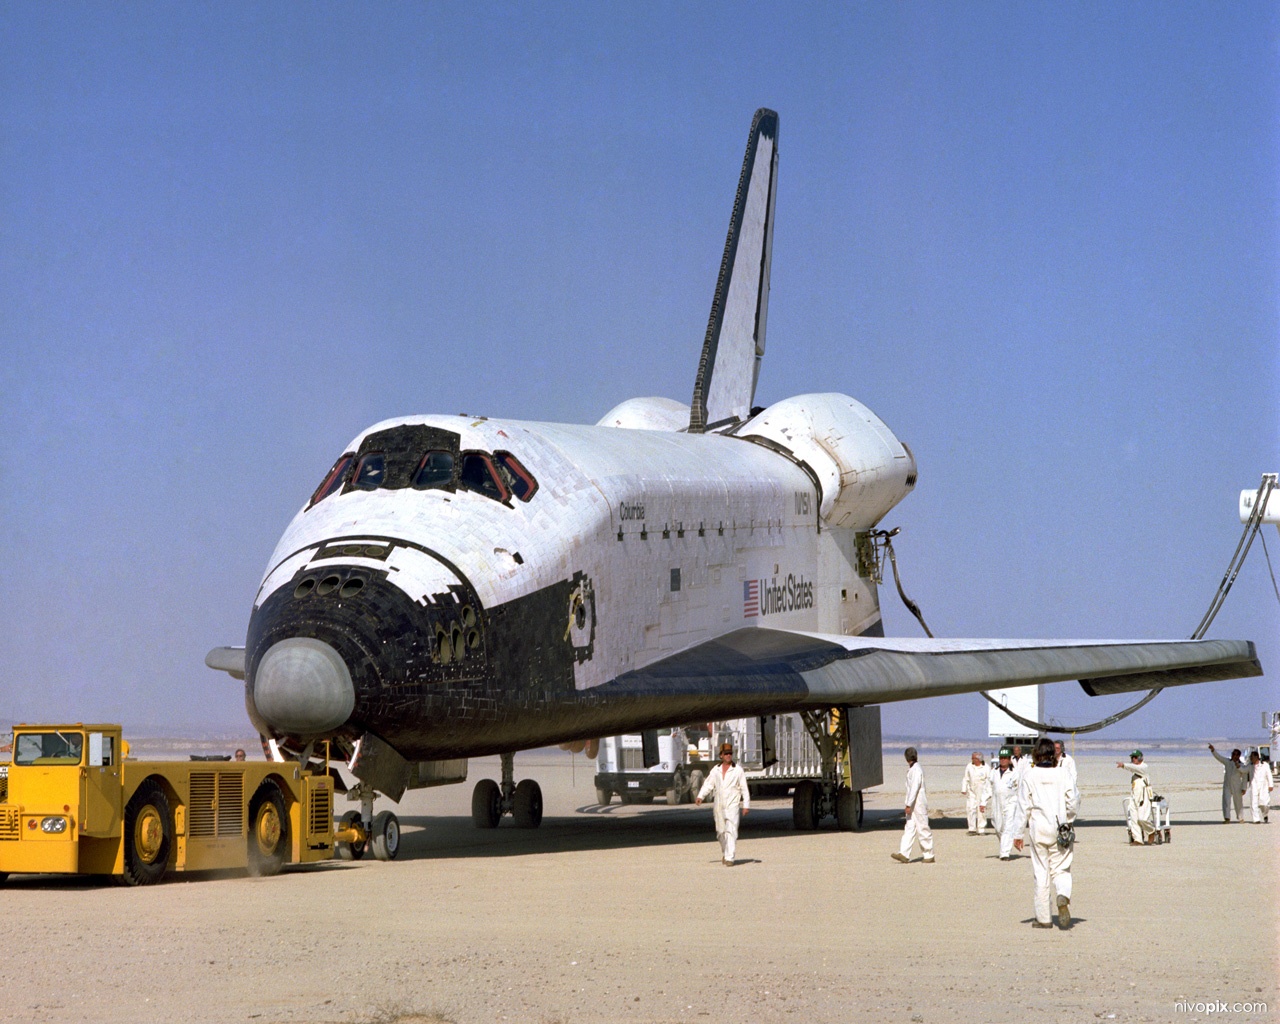 Space Shuttle Columbia after landing to complete its first orbital mission